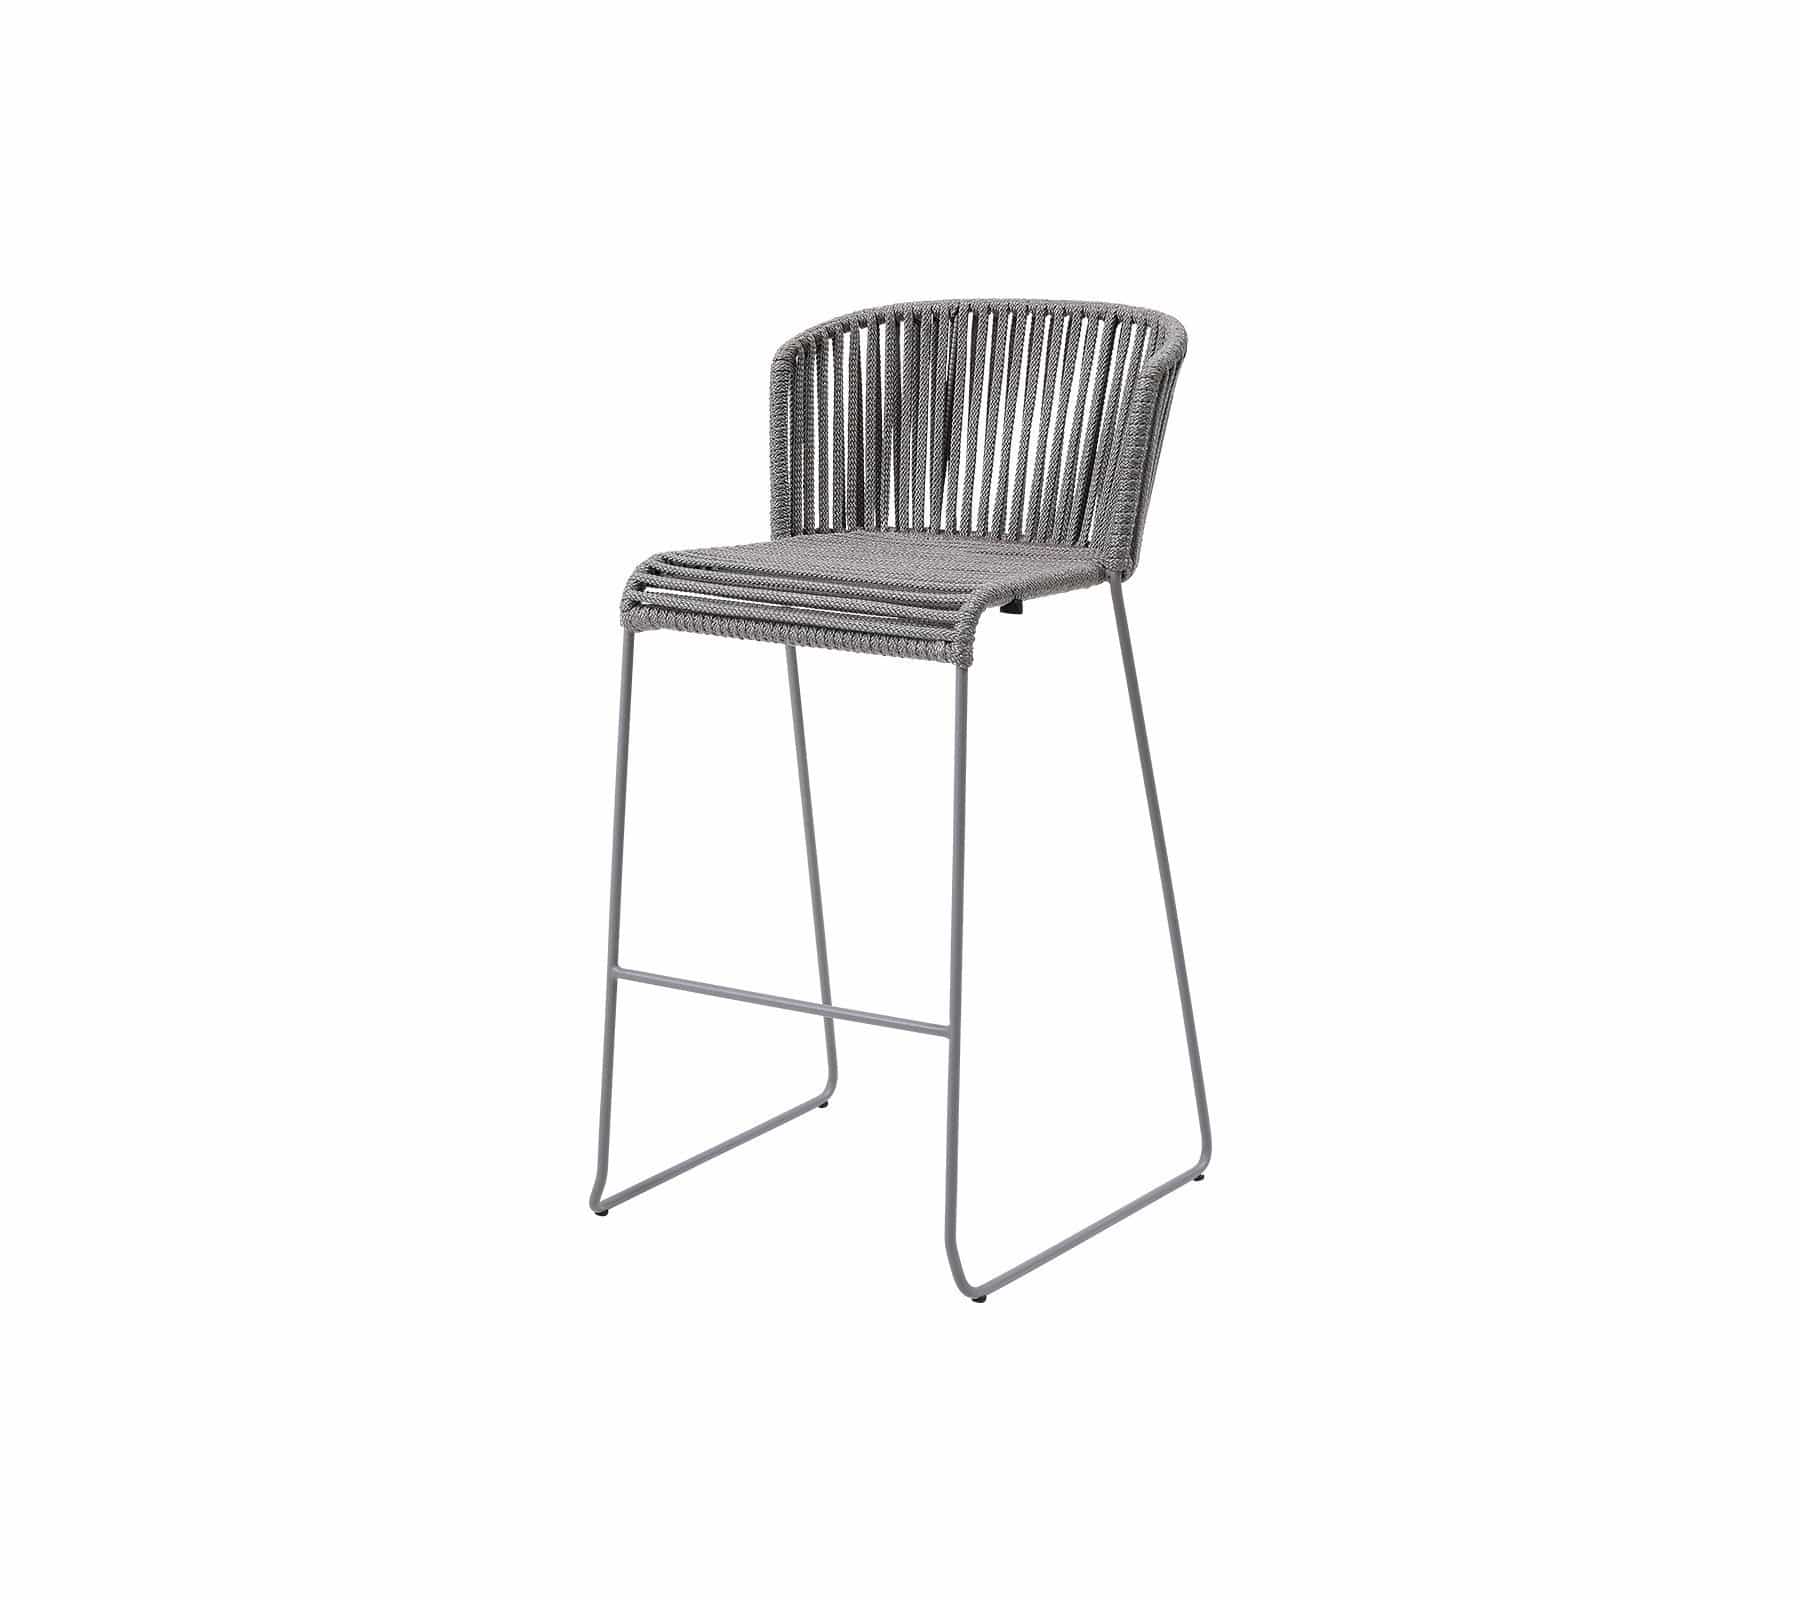 Cane-Line Denmark Outdoor Chairs Cane-Line Moments bar chair  7445ROG